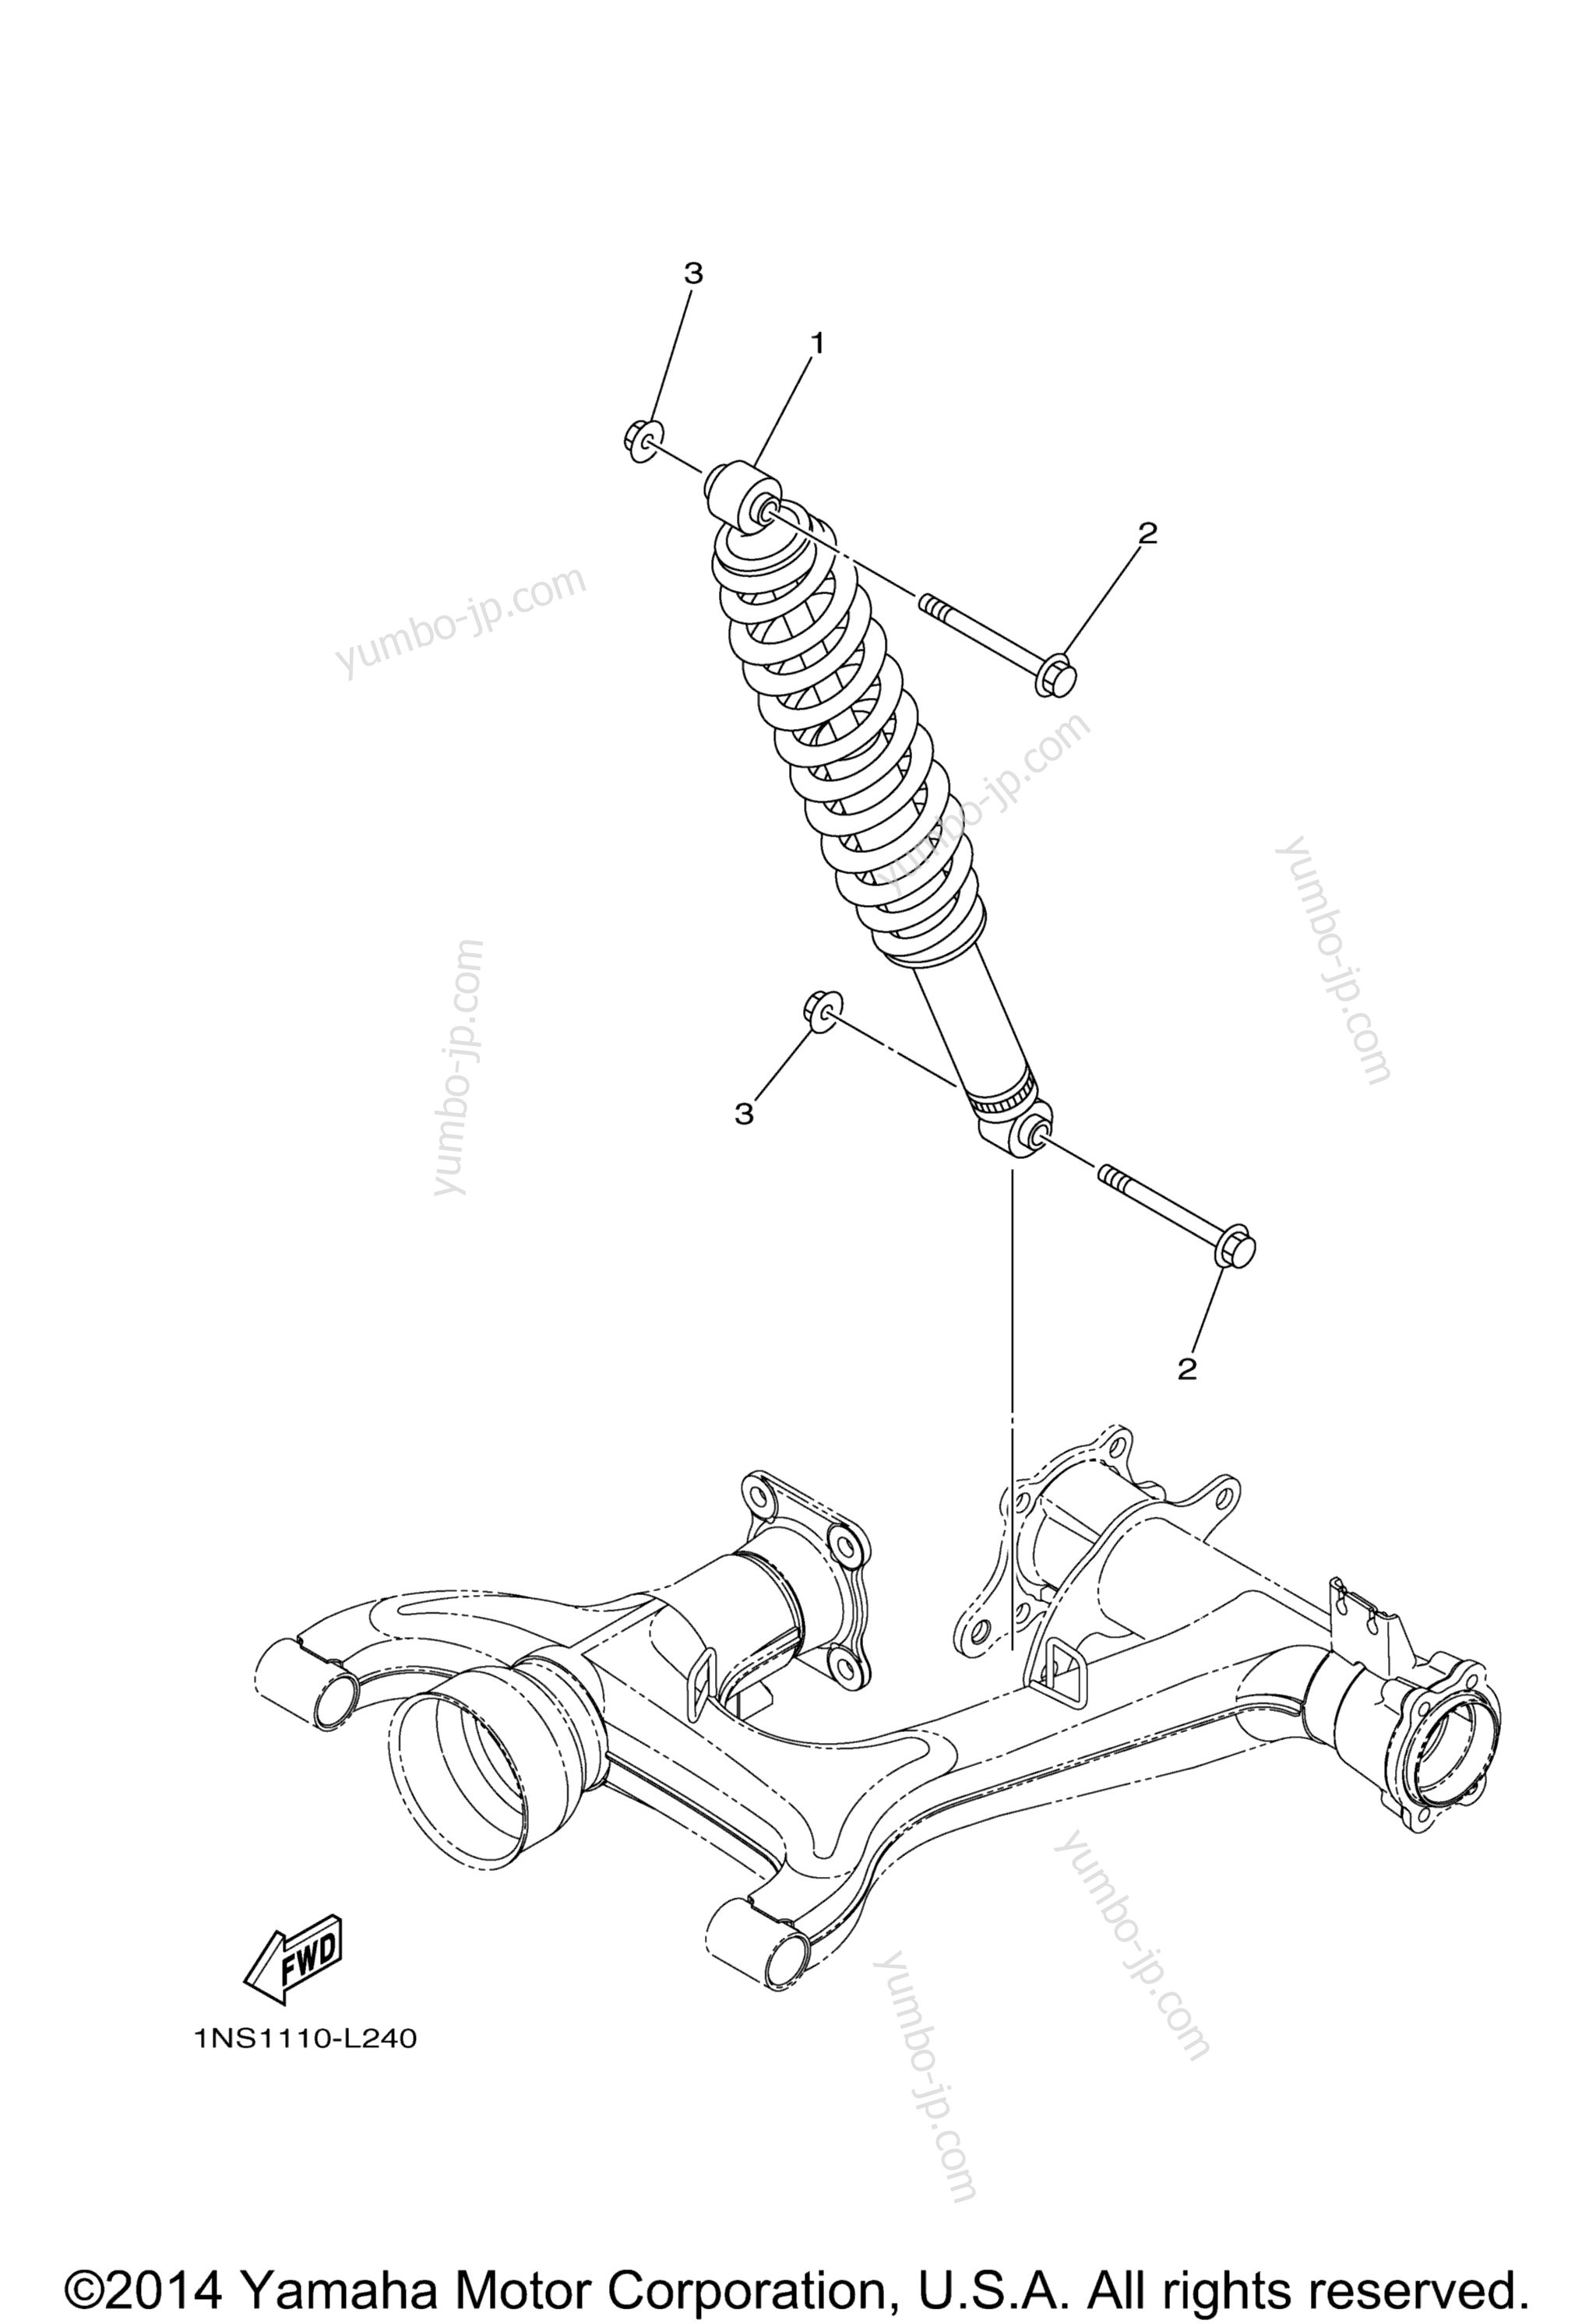 Rear Suspension for ATVs YAMAHA GRIZZLY 350 2WD (YFM350TEG) 2014 year